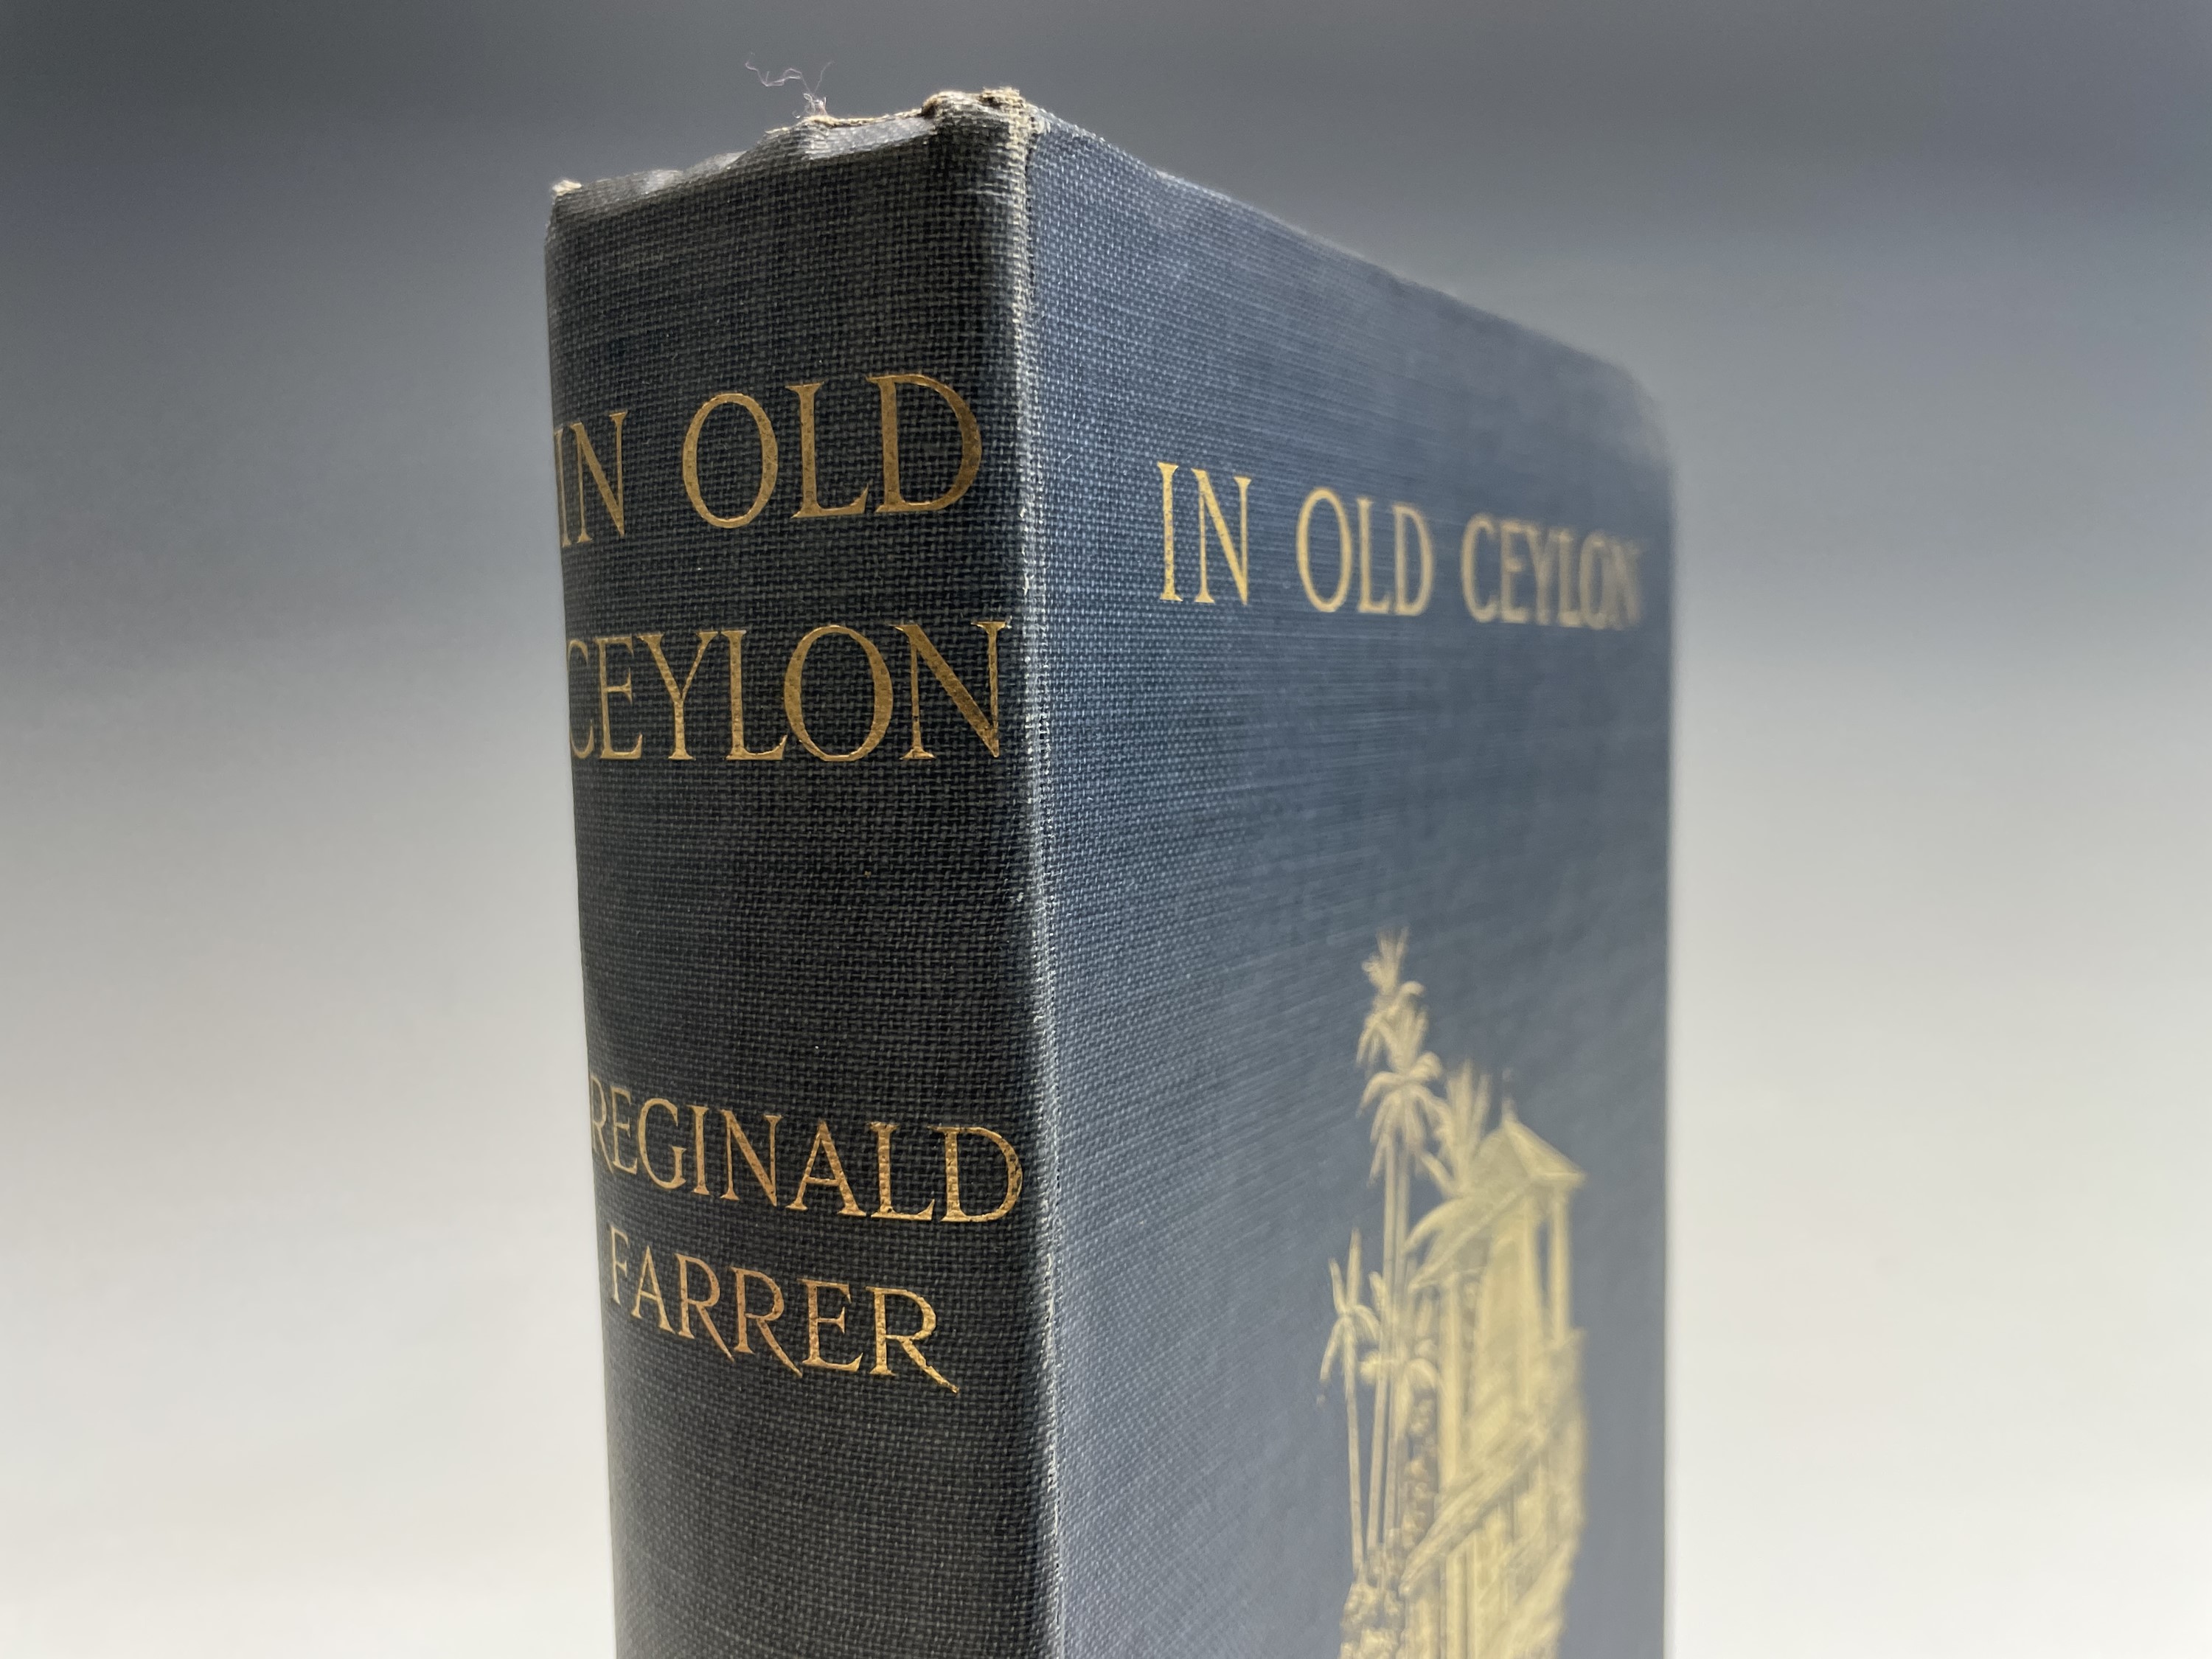 REGINALD FARRER. 'In Old Ceylon.' First edition, original decorative gilt cloth, leaves uncut with - Image 12 of 16